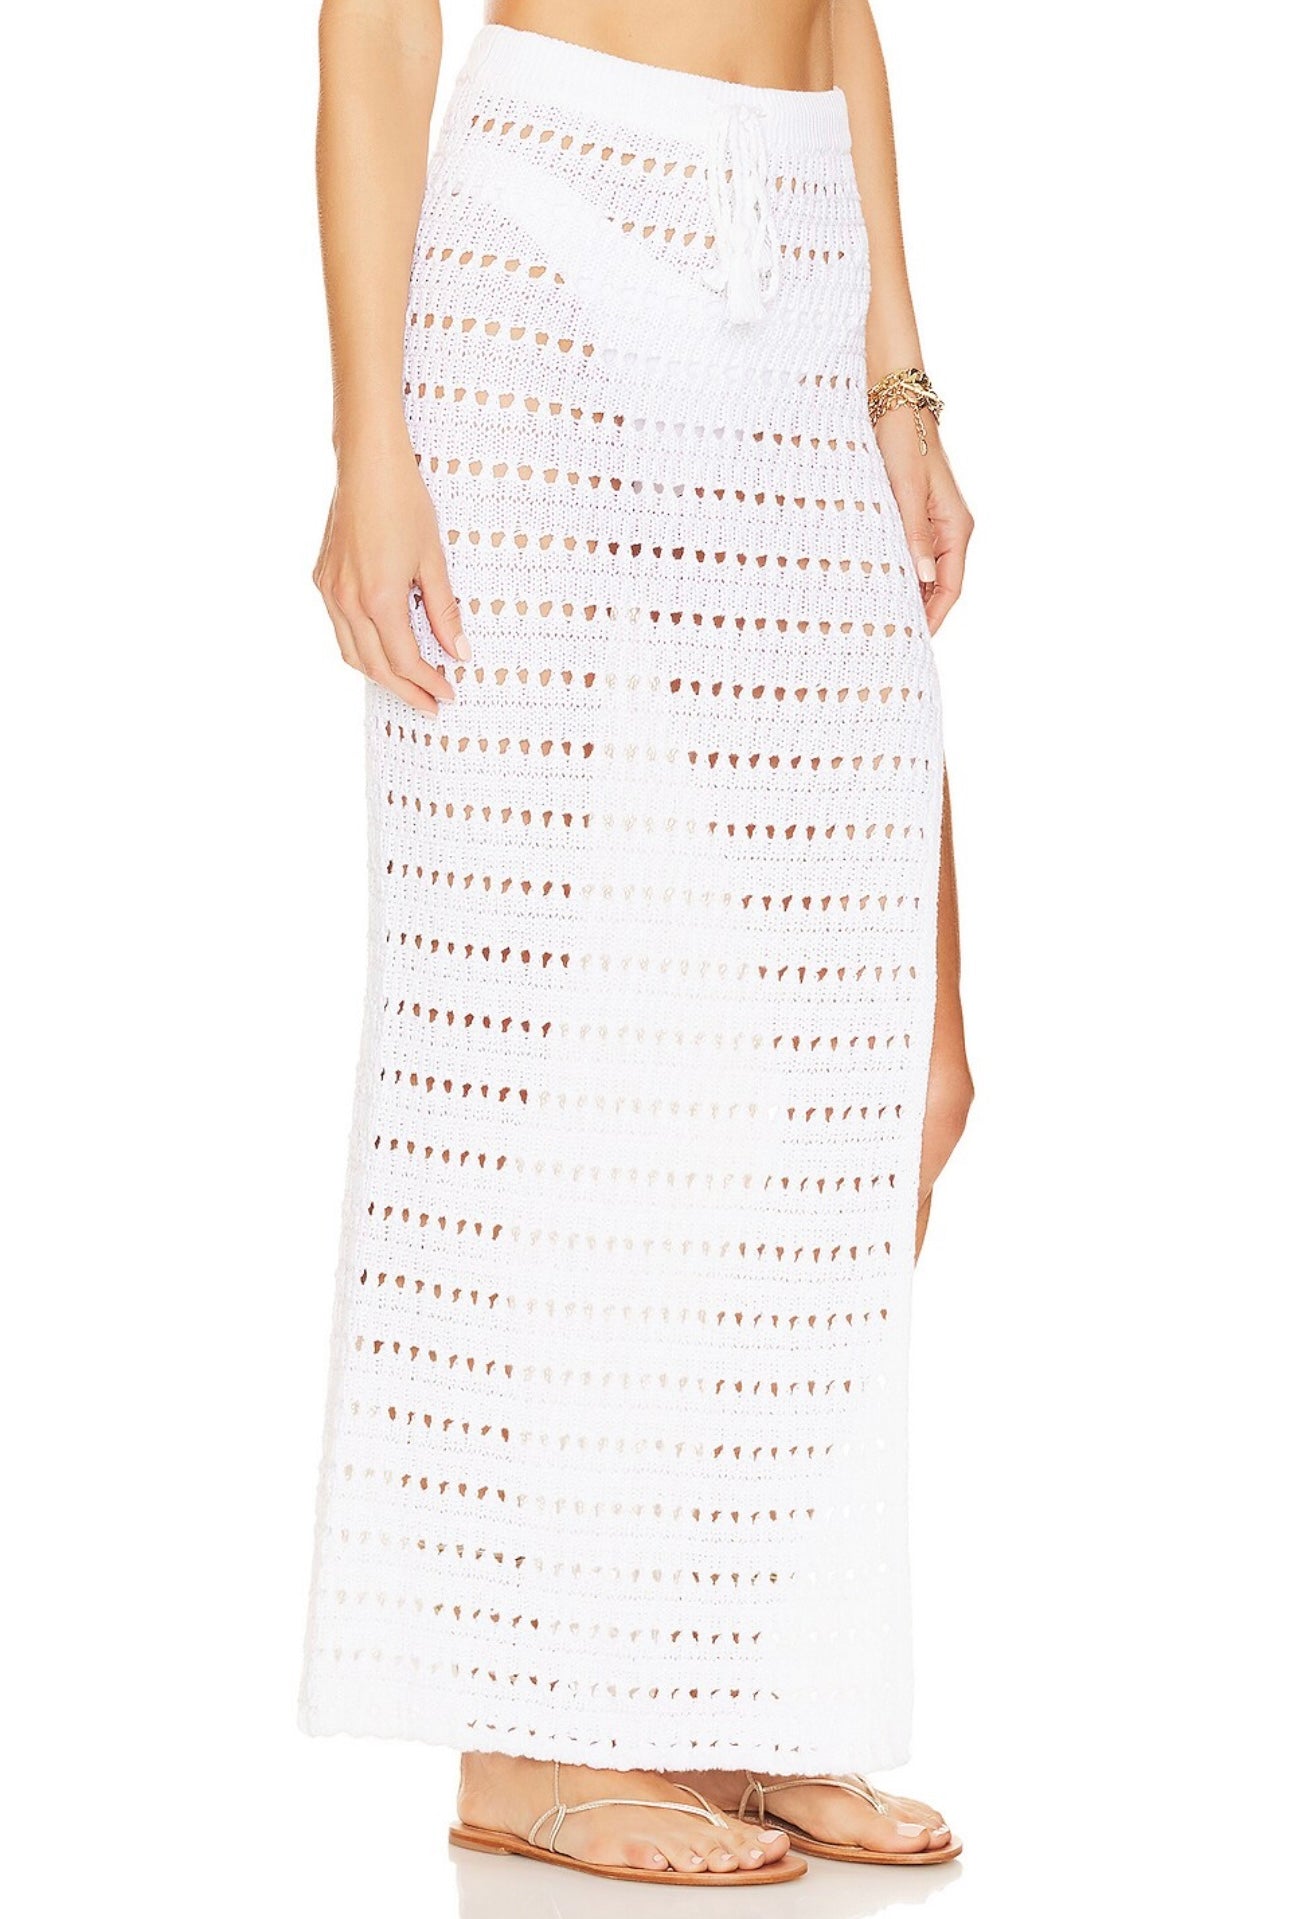 LSPACE - Sweetest Thing Skirt in Cream